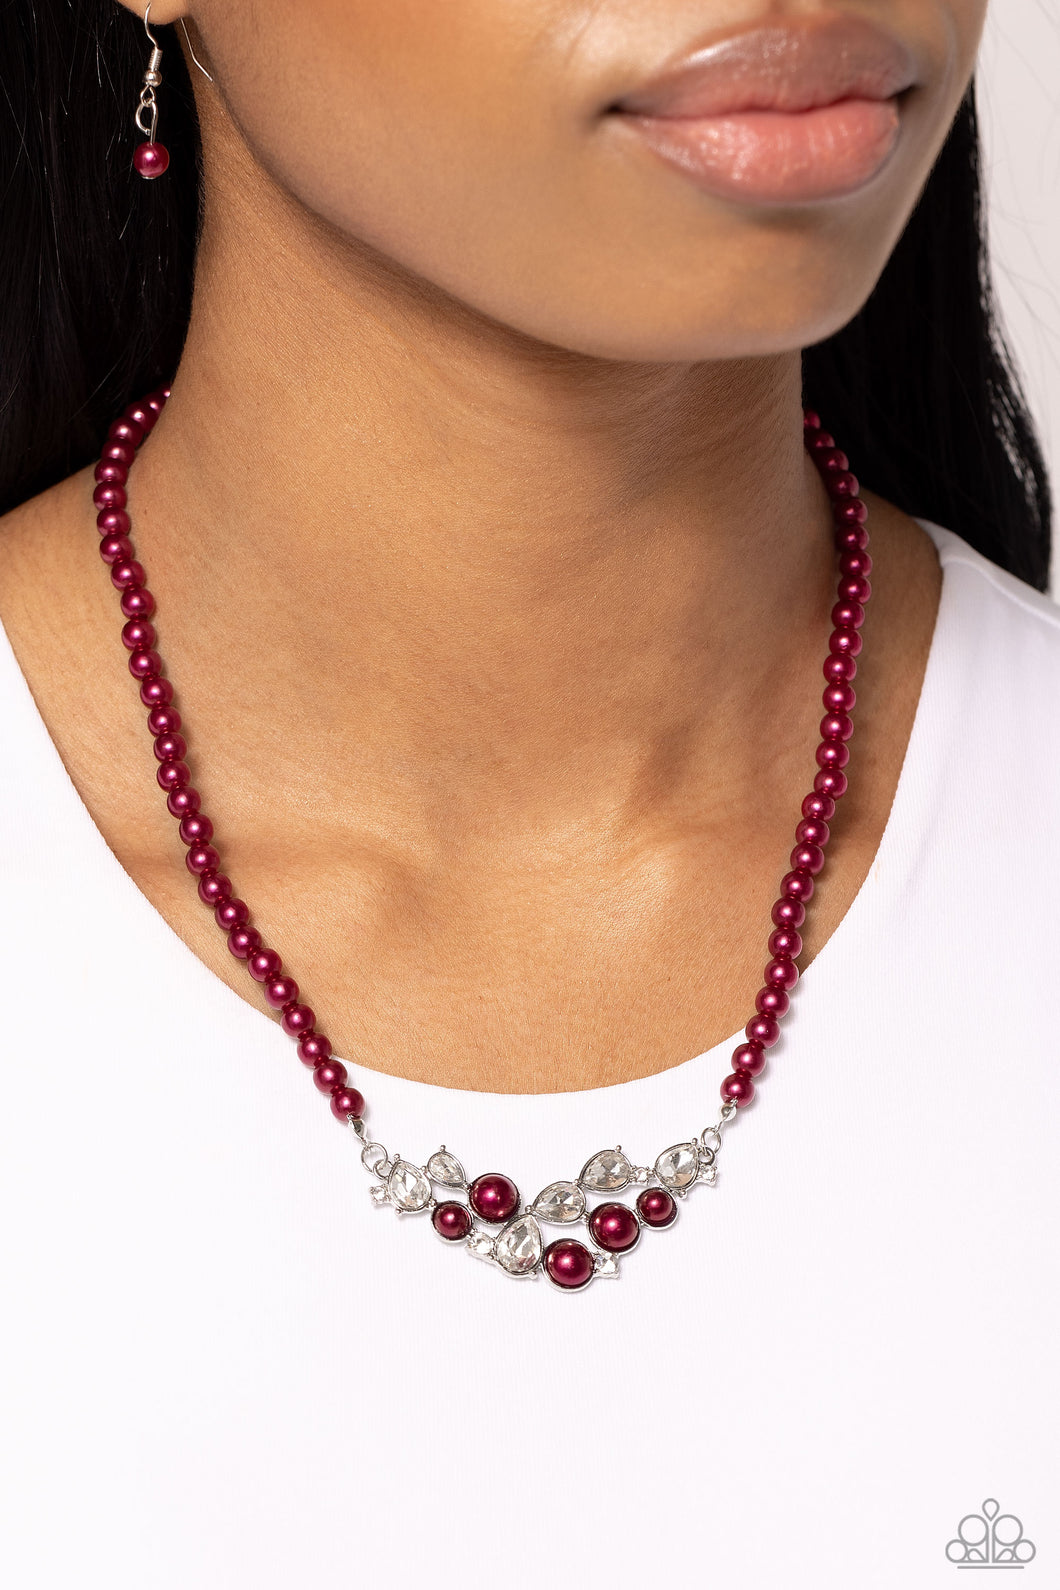 Paparazzi “Pampered Pearls” Red Necklace Earring Set